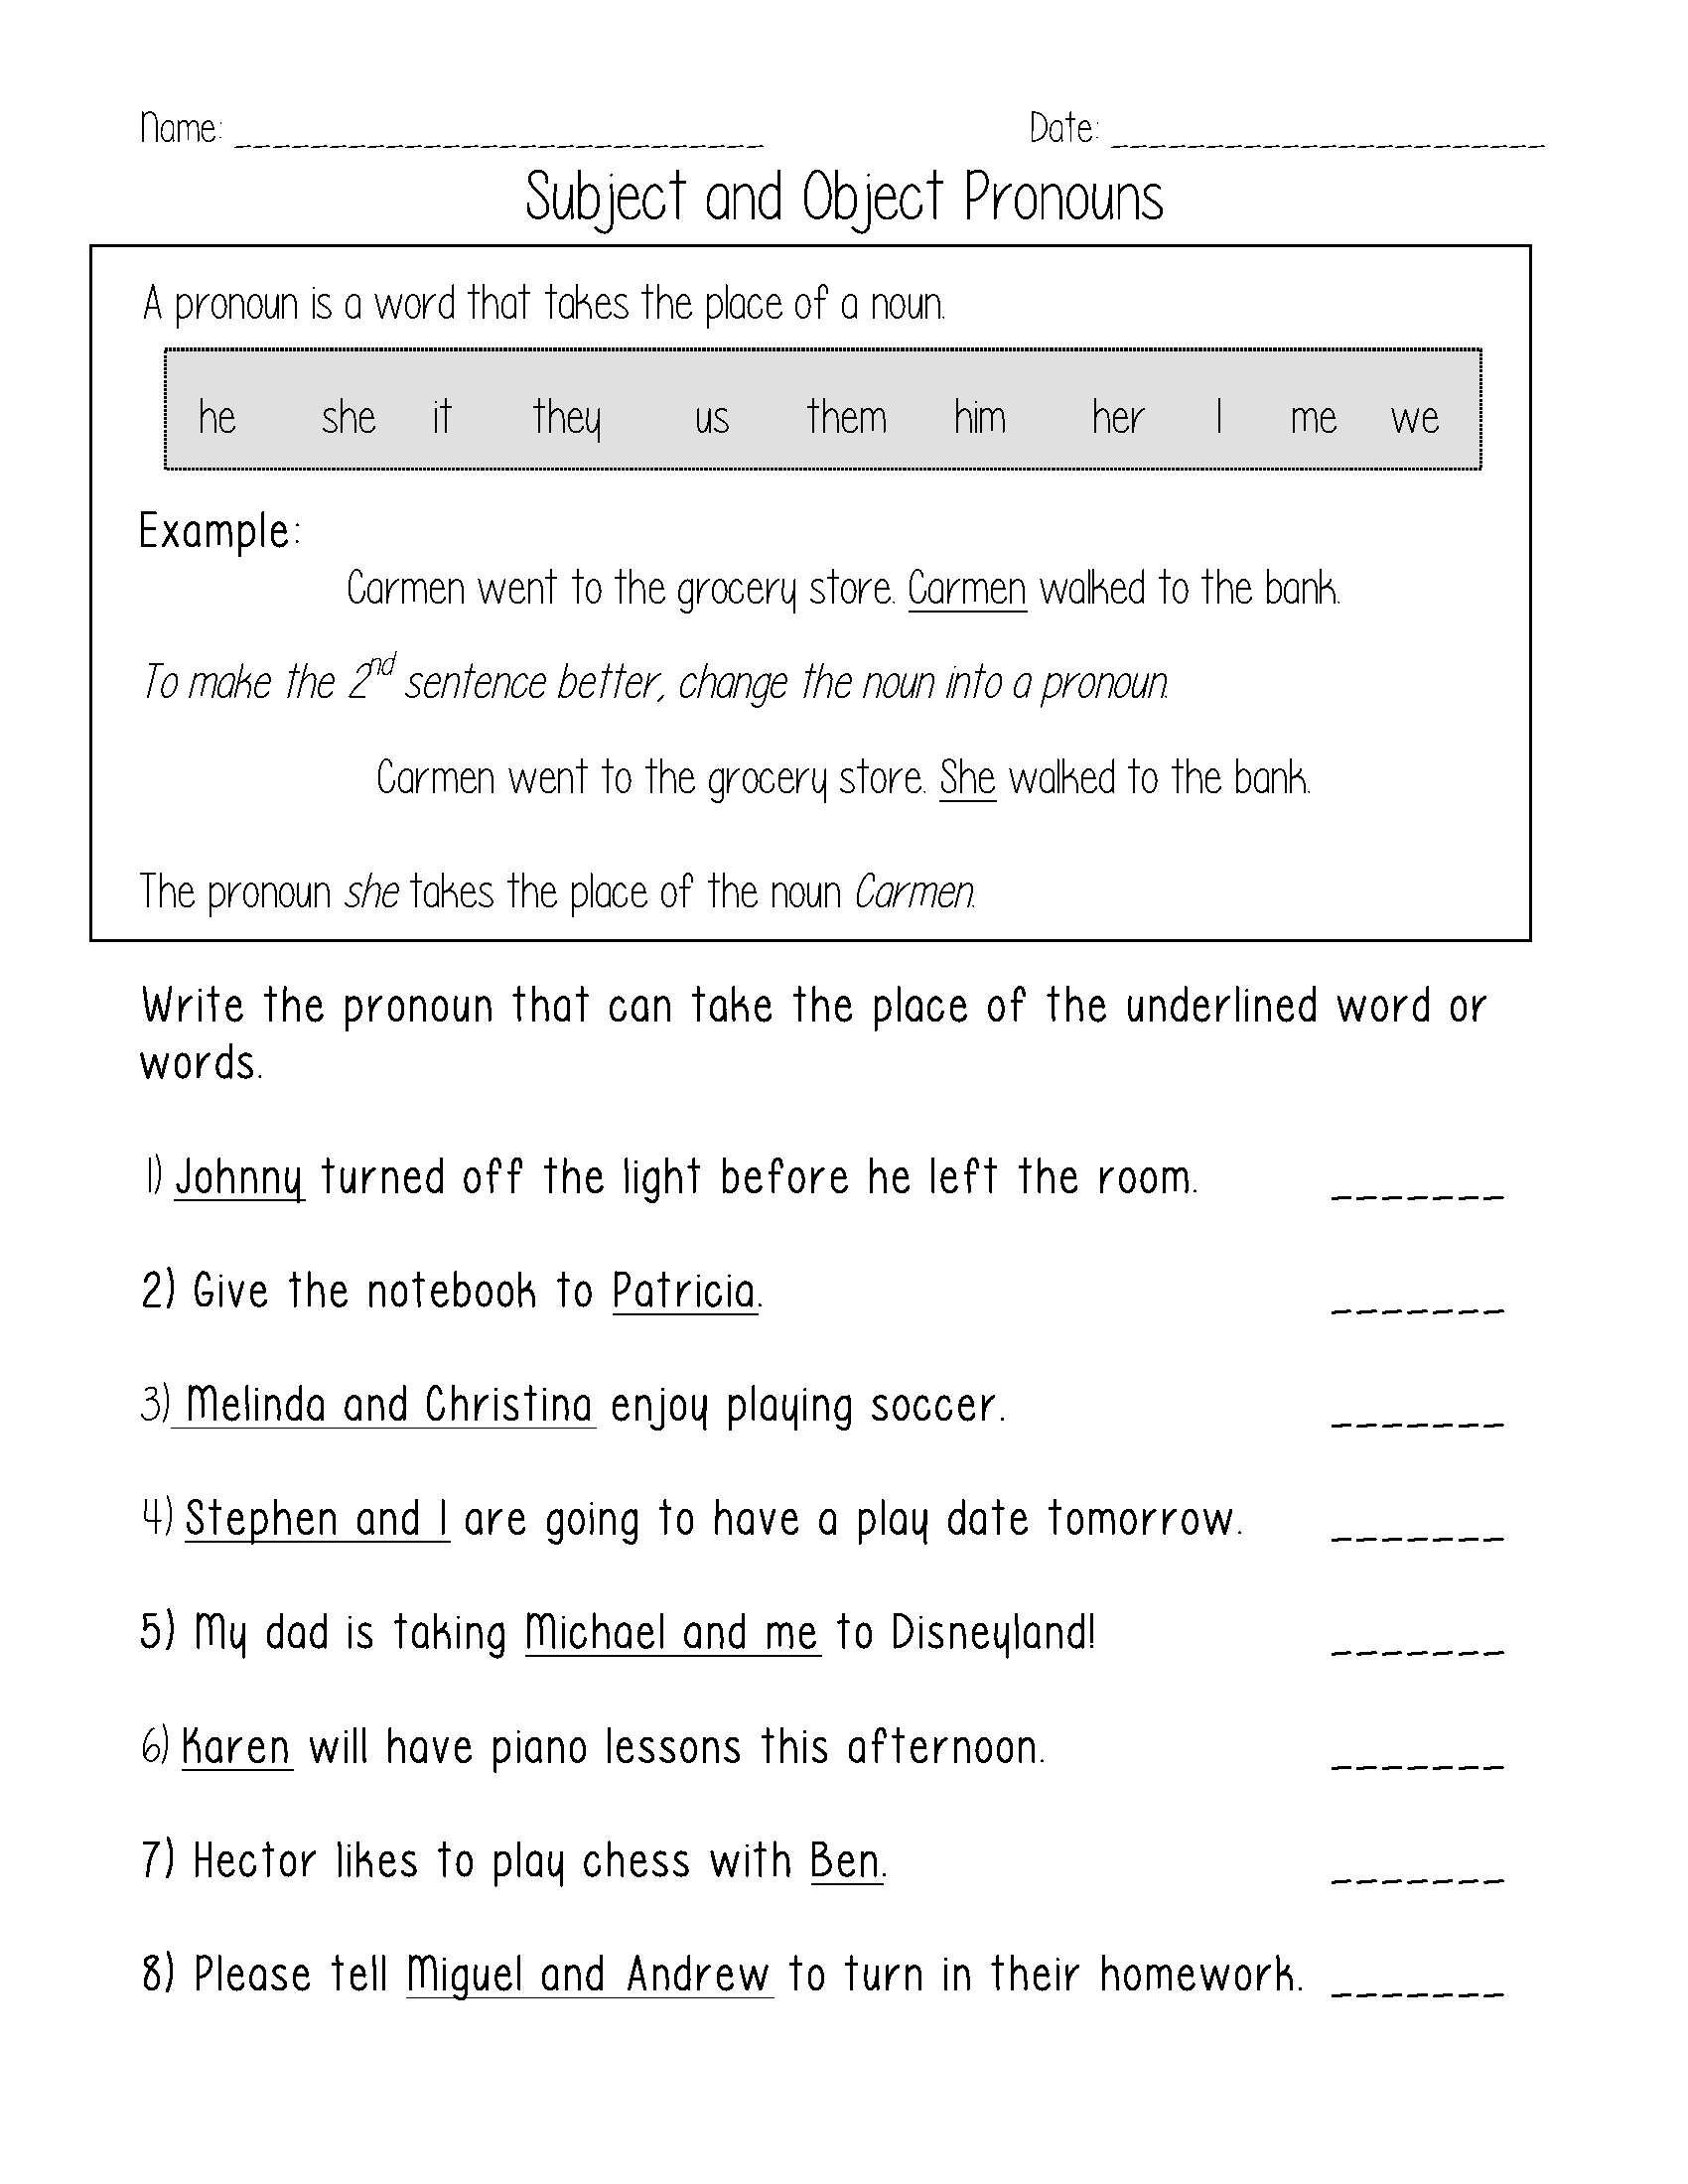 Pronoun Worksheets For 2nd Grade